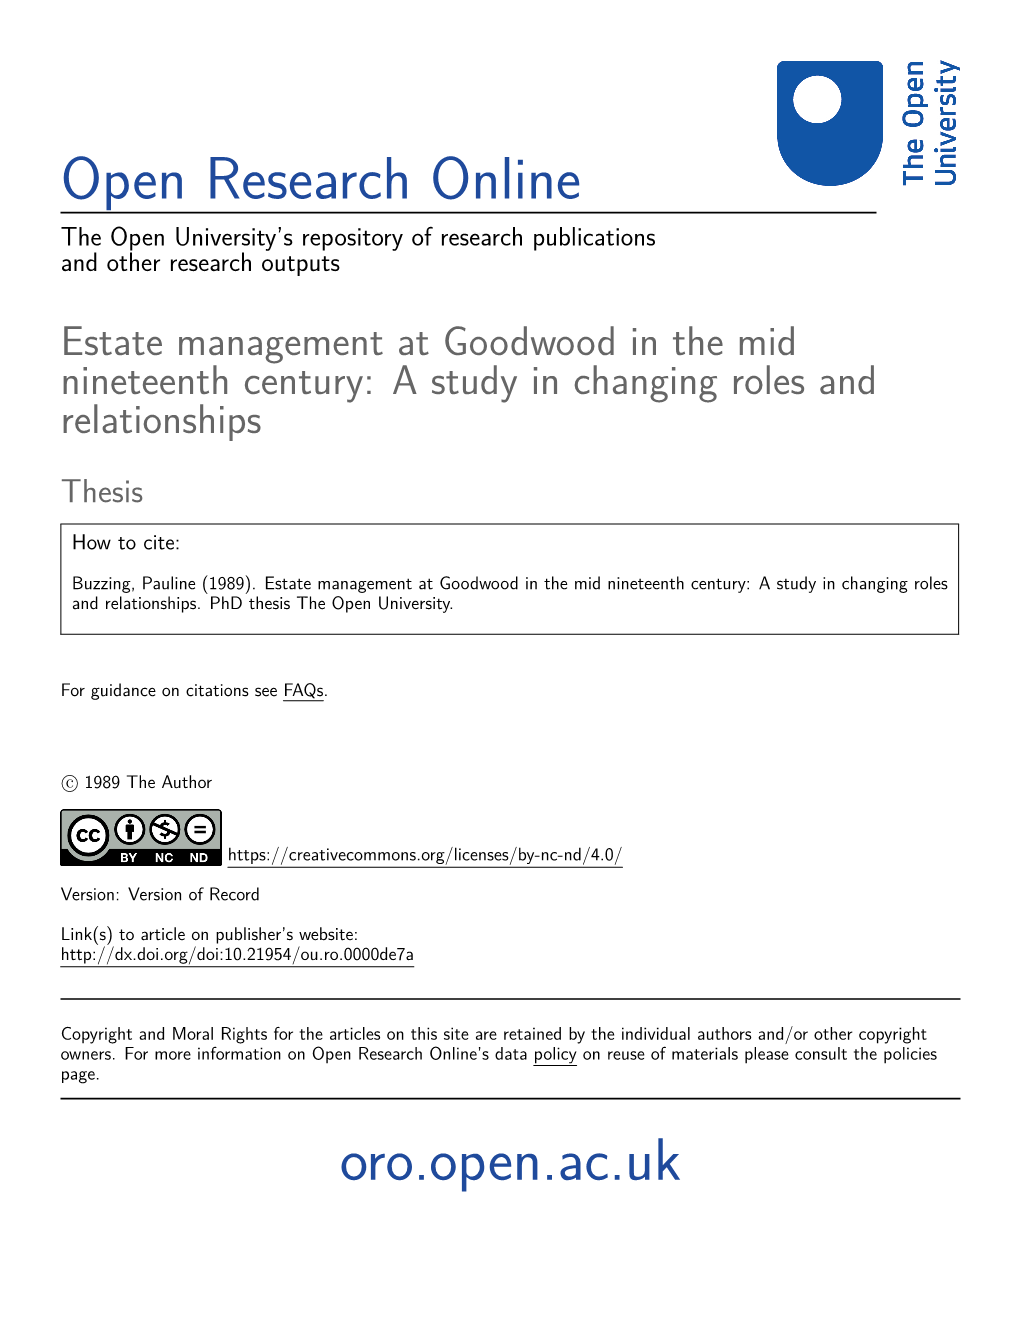 Estate Management at Goodwood in the Mid Nineteenth Century: a Study in Changing Roles and Relationships